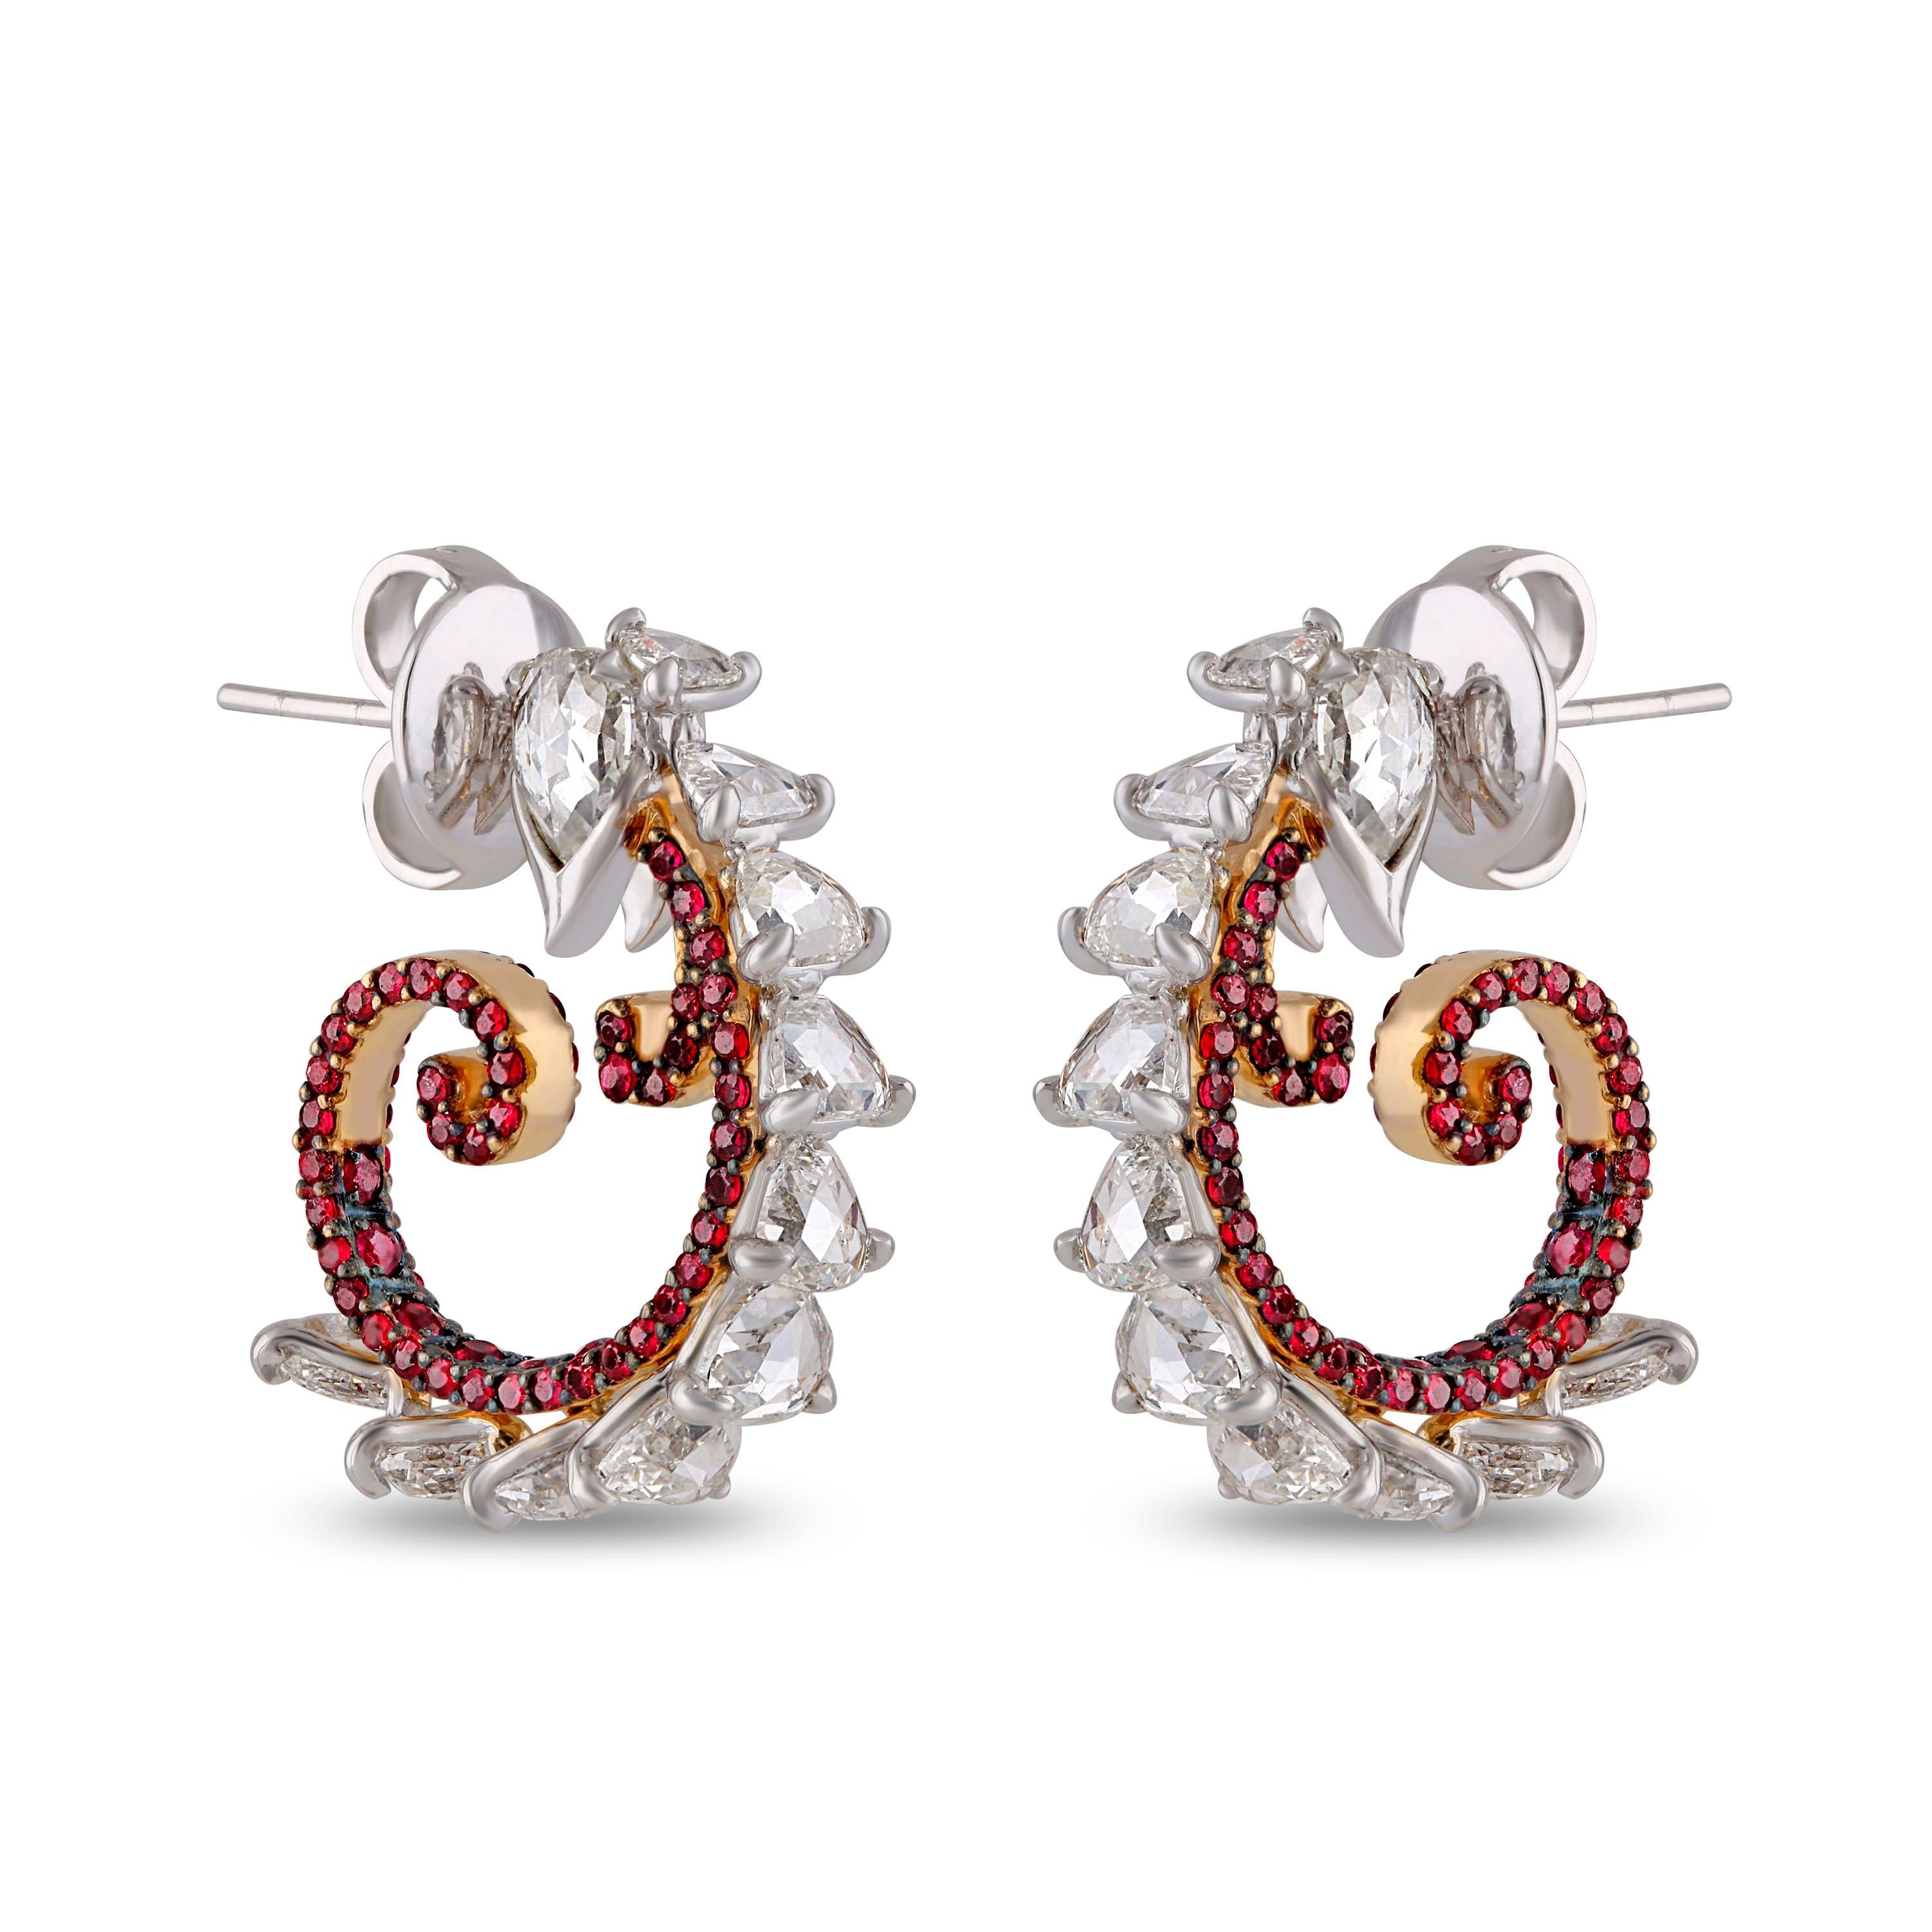 Studio Rêves Diamond and Ruby Curled Hoop Earrings in 18 Karat Gold In New Condition For Sale In Mumbai, Maharashtra